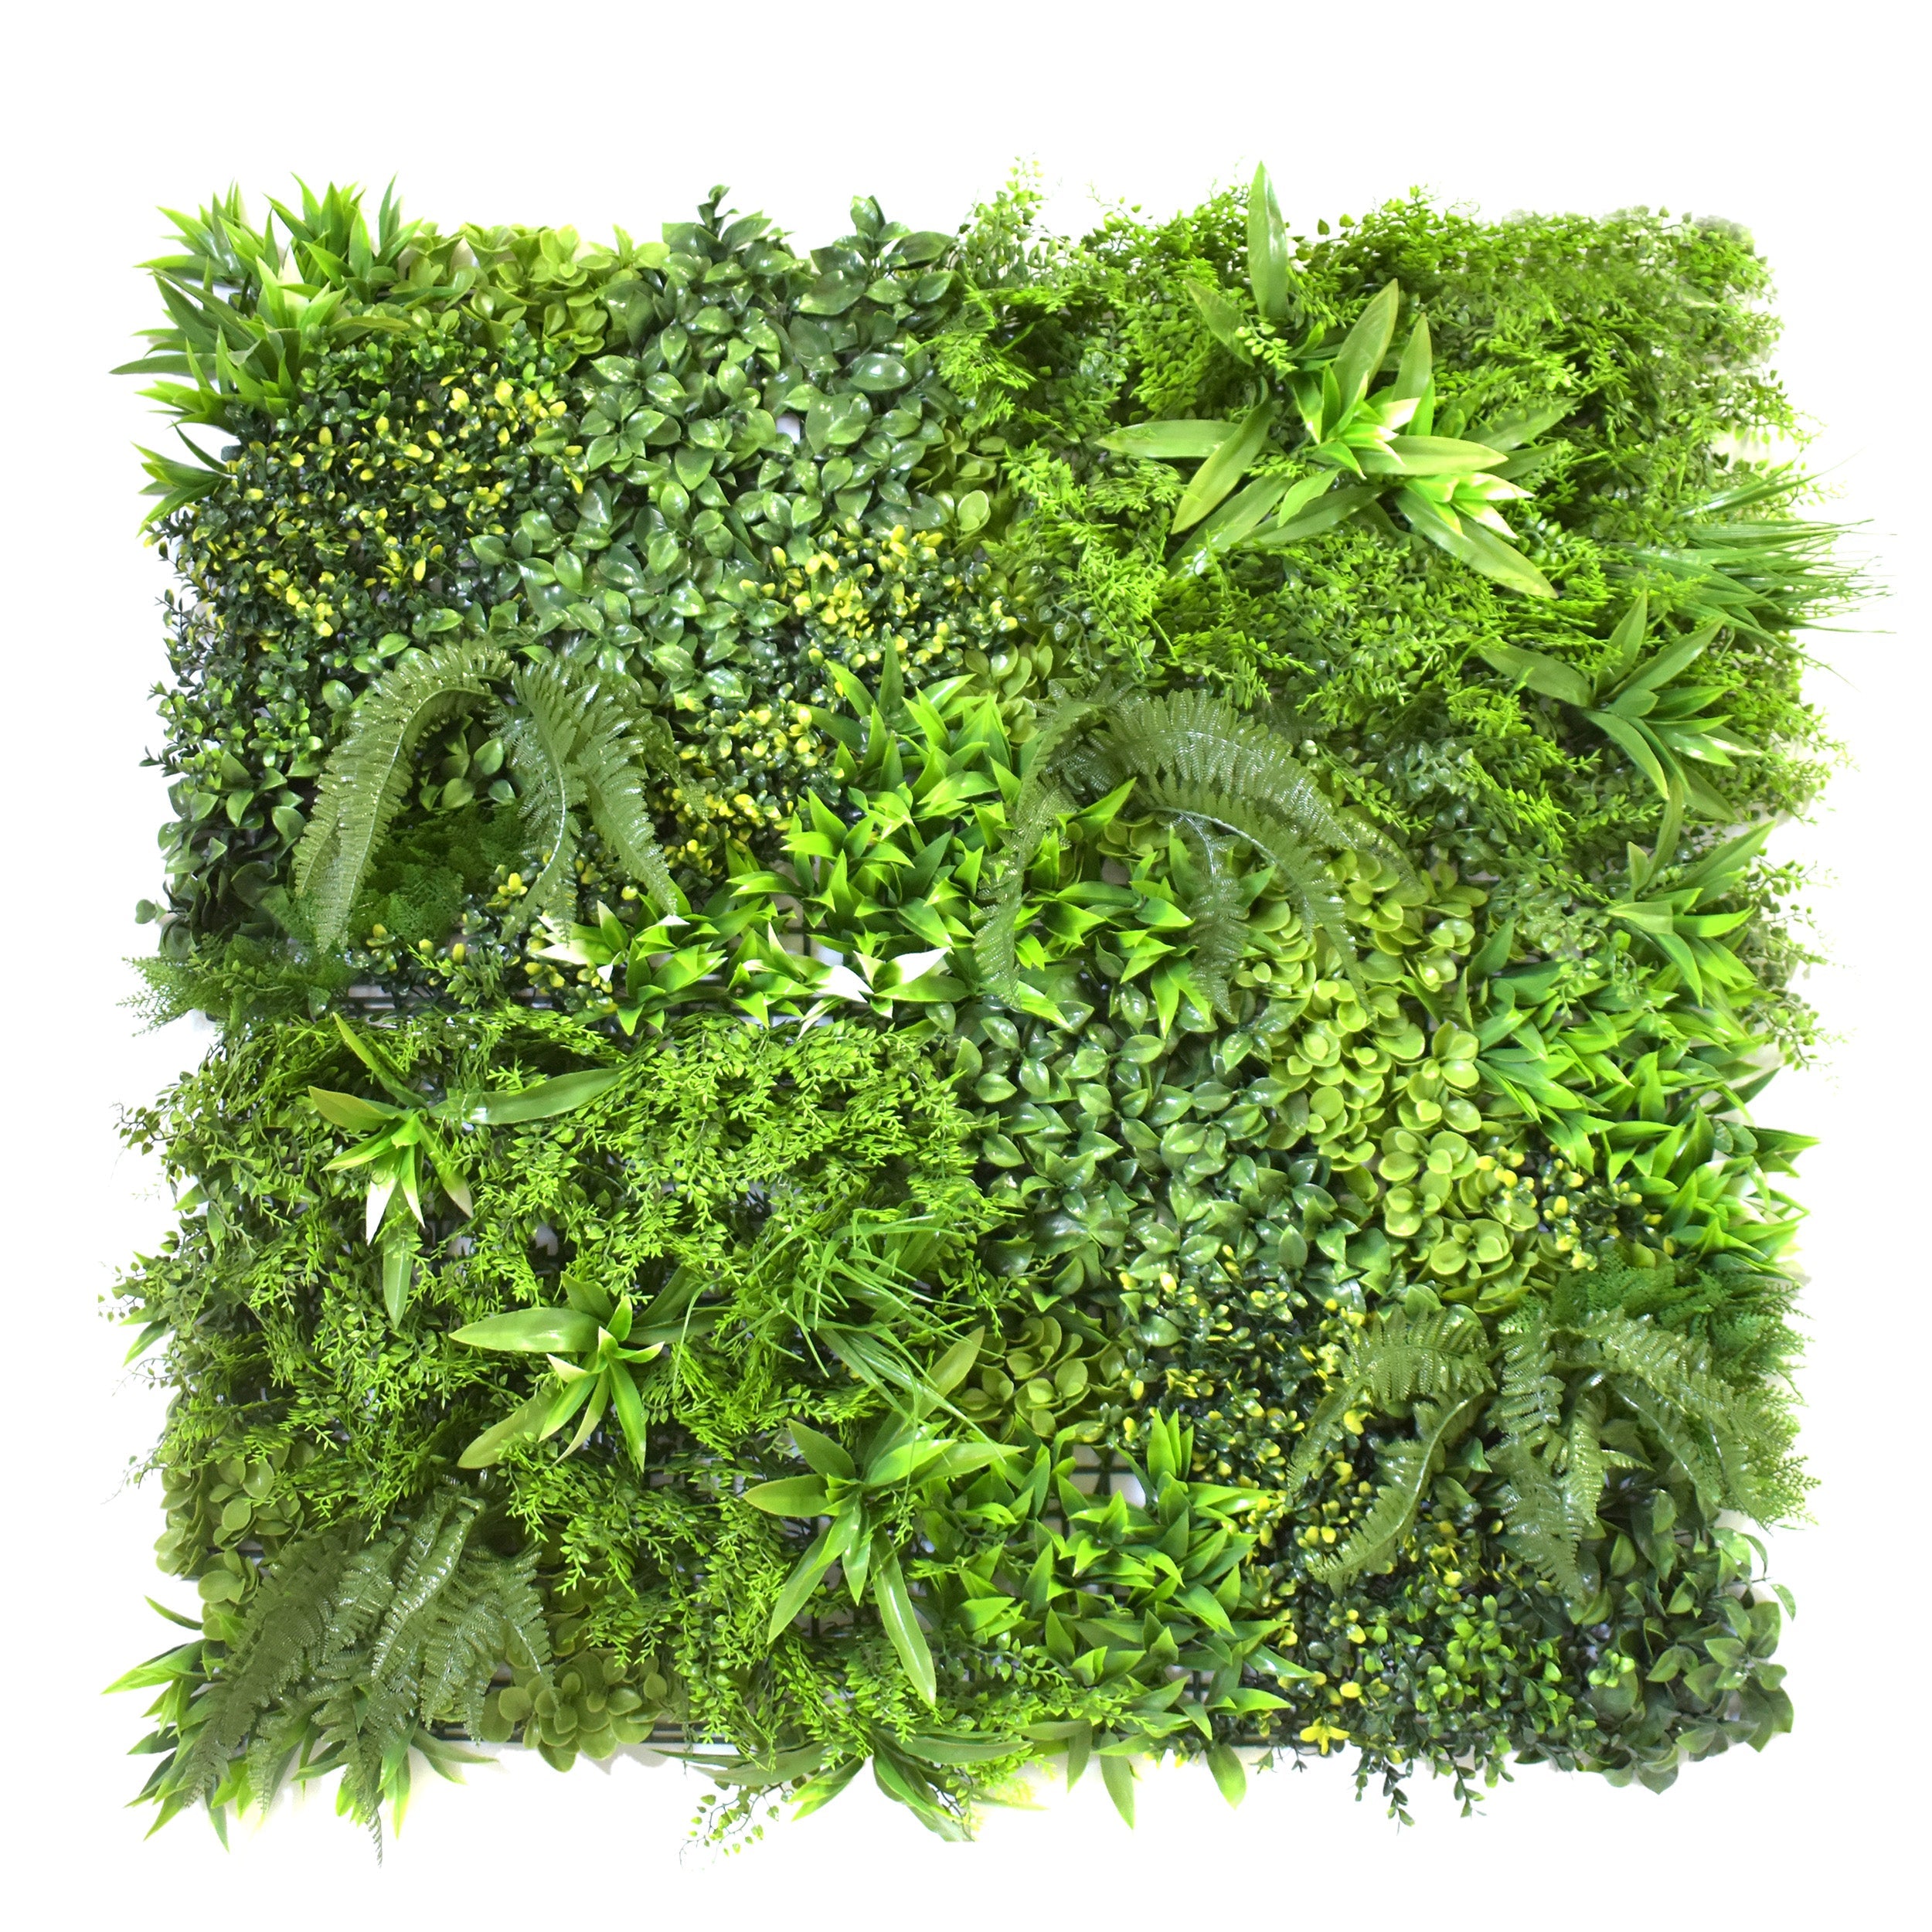 Aavana Greens Artificial Vertical Garden Wall Panel 100X100 CM For Home & Office Decoration 100% UV Indoor And Outdoor Use Option 17